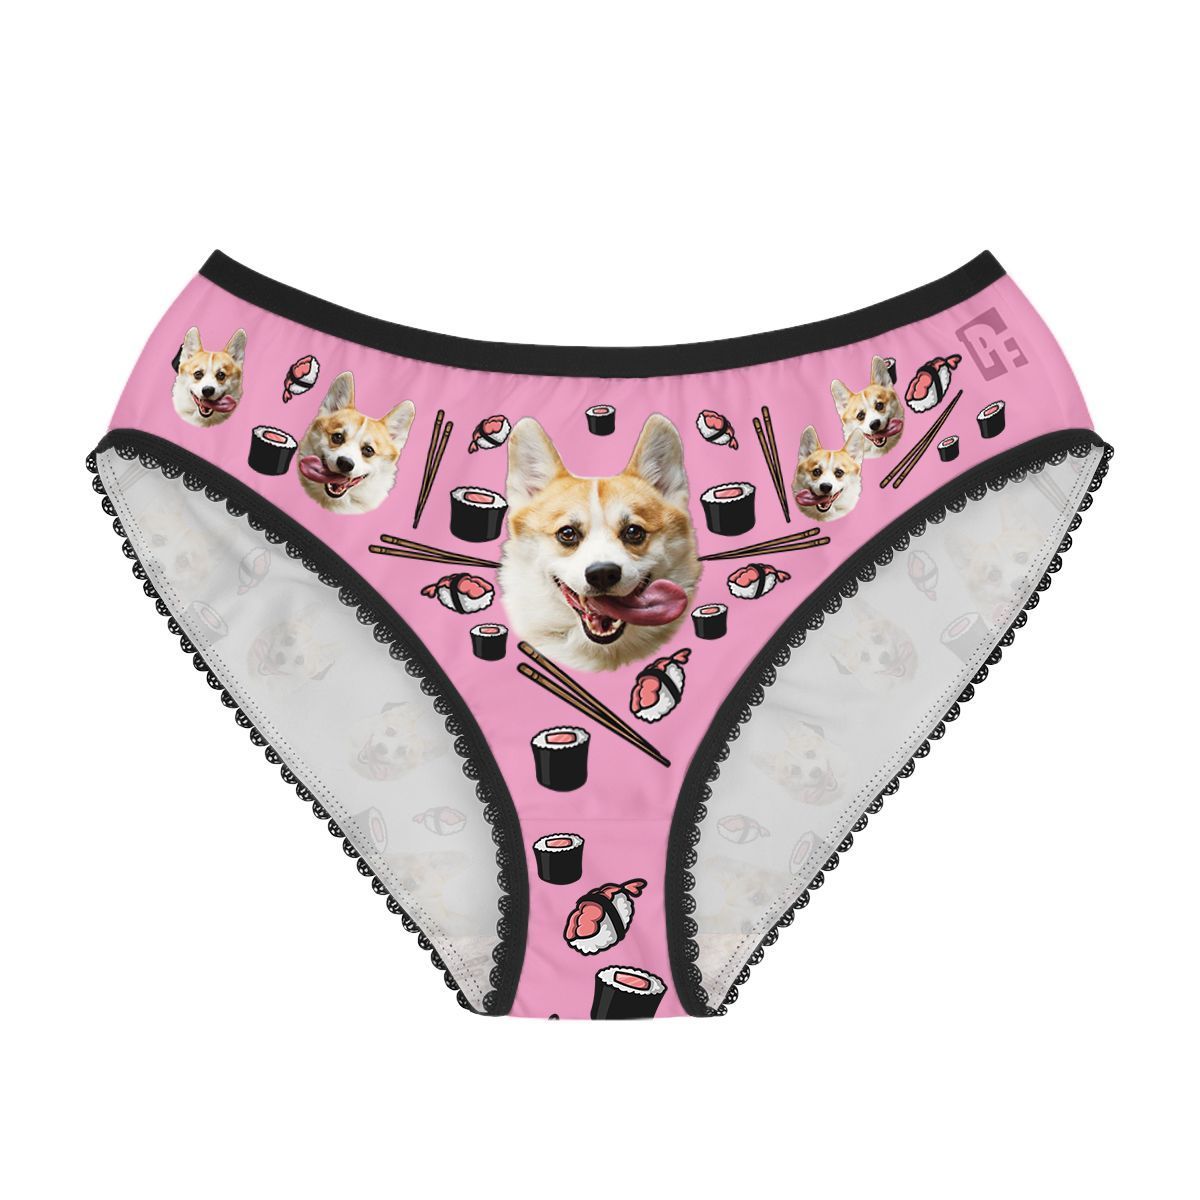 Pink Sushi women's underwear briefs personalized with photo printed on them